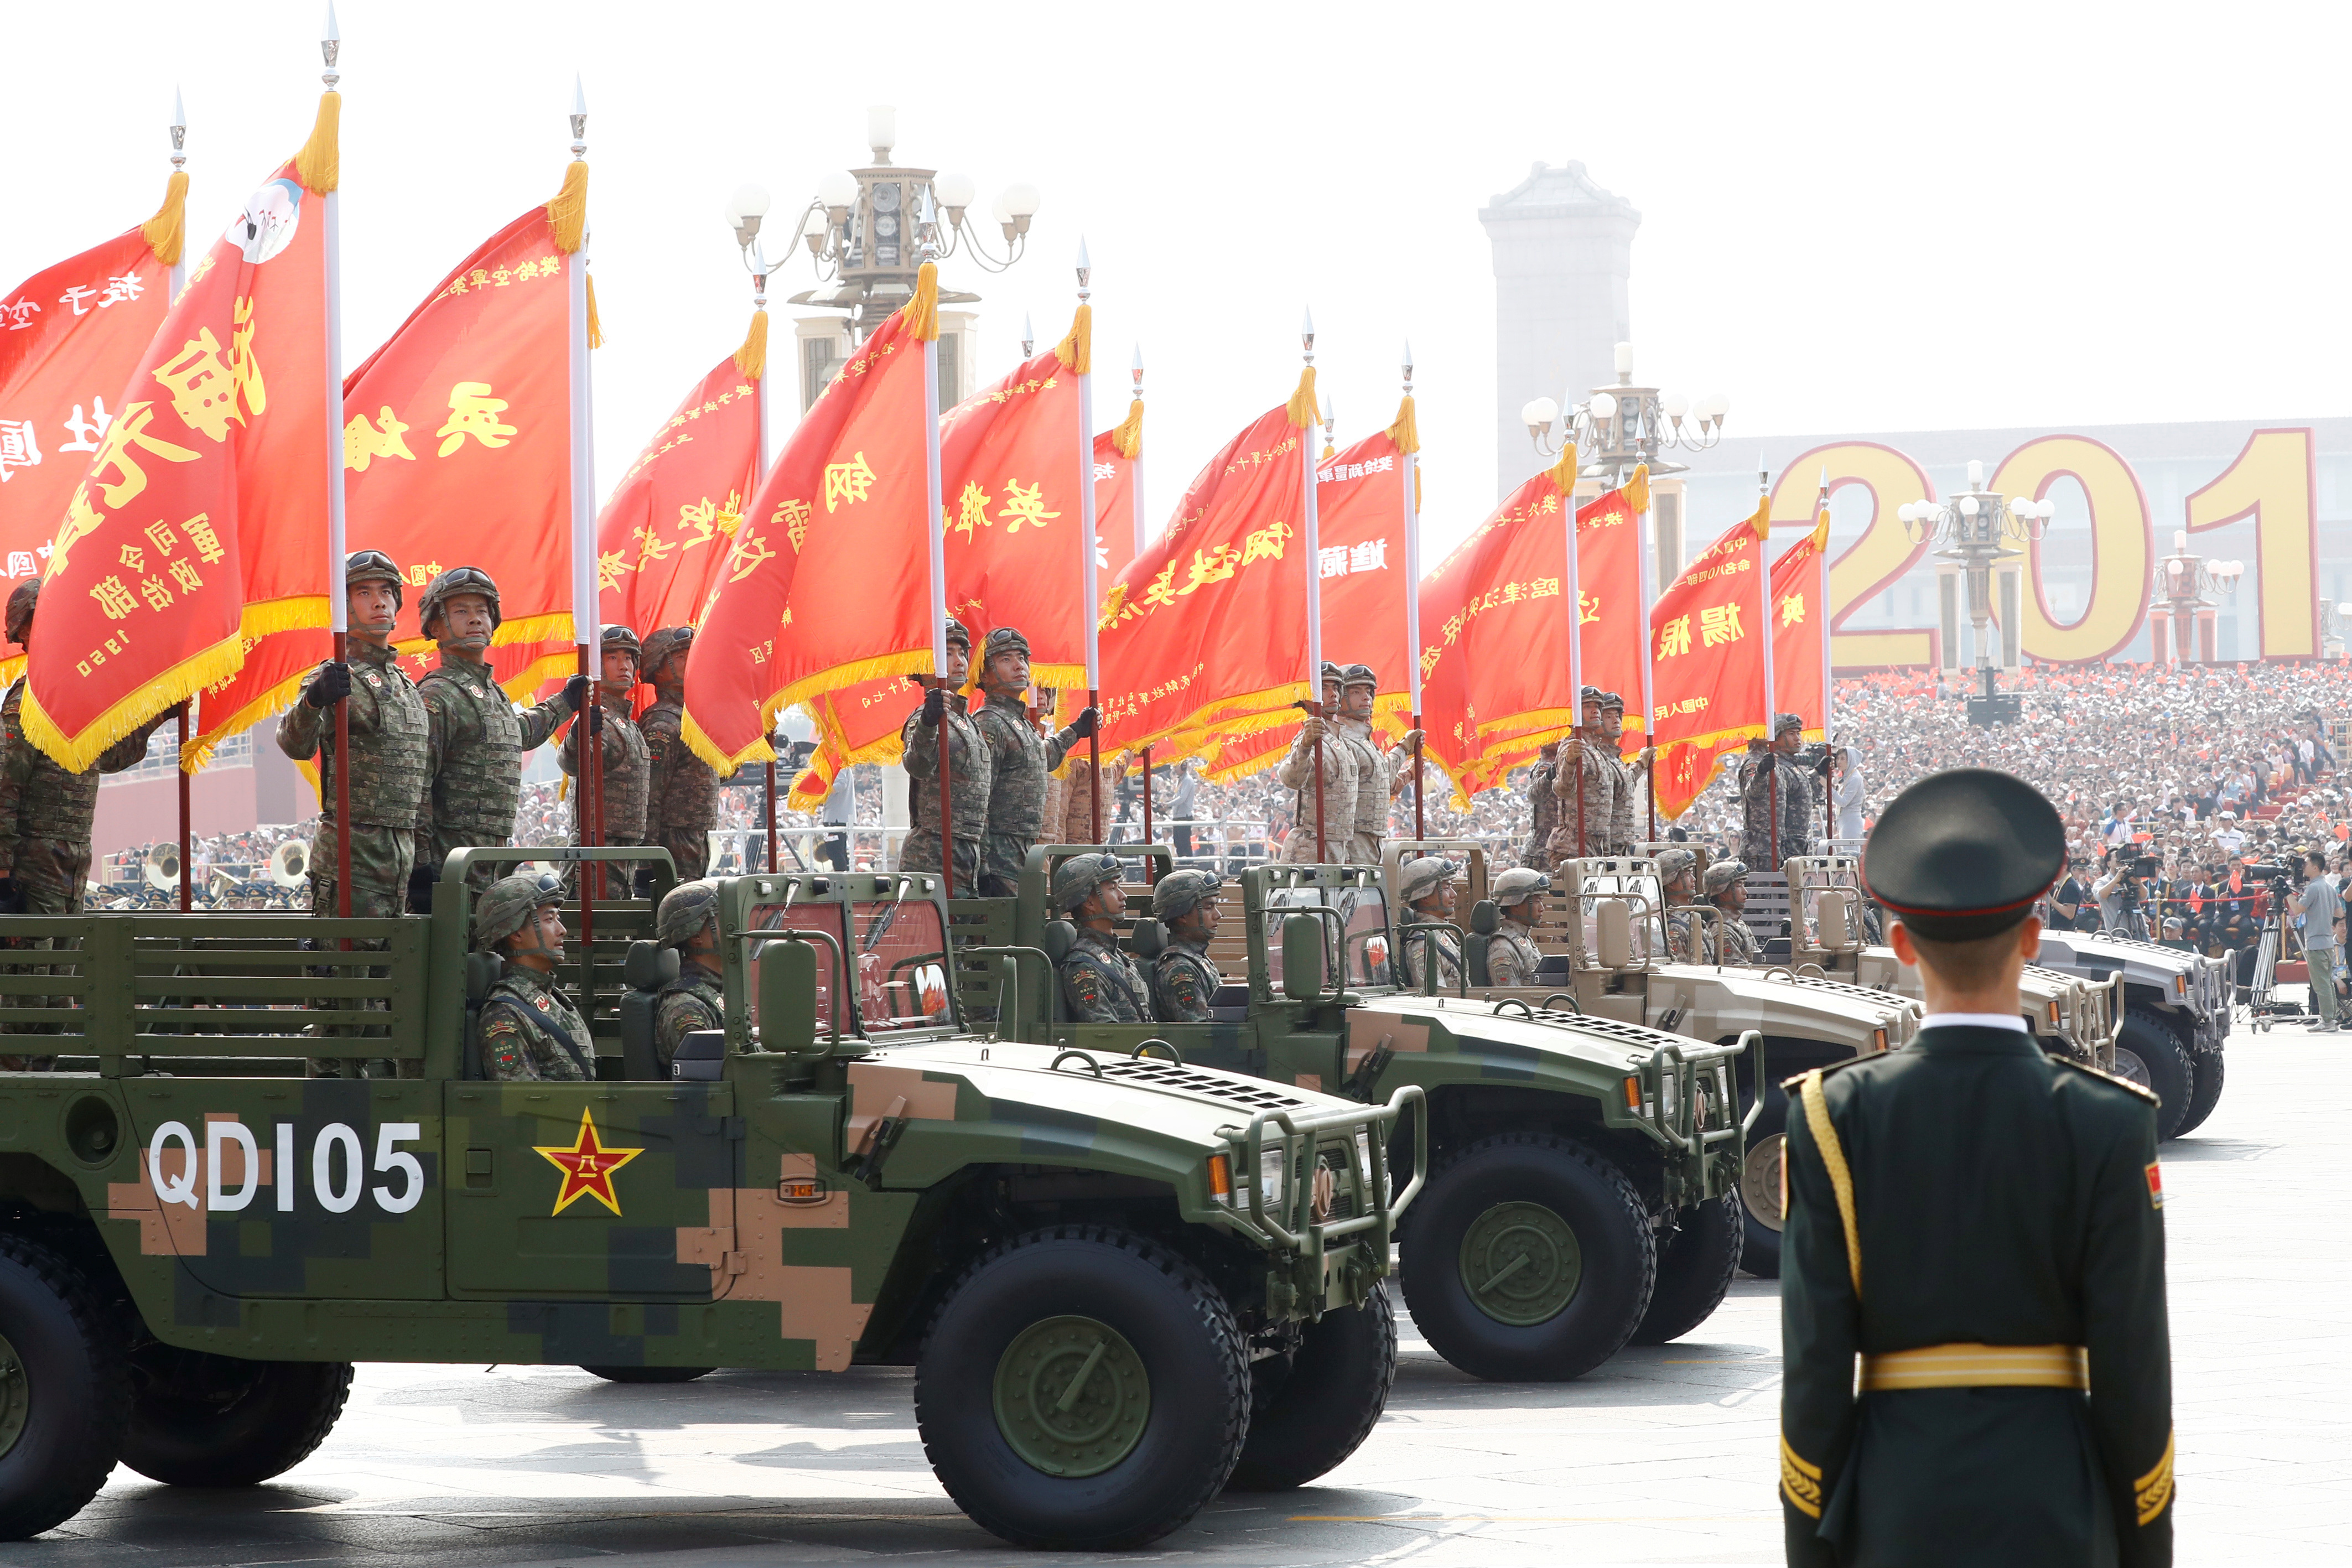 Troops in military vehicles take part in the military parade marking the 70th founding anniversary of People's Republic of China, on its National Day in Beijing